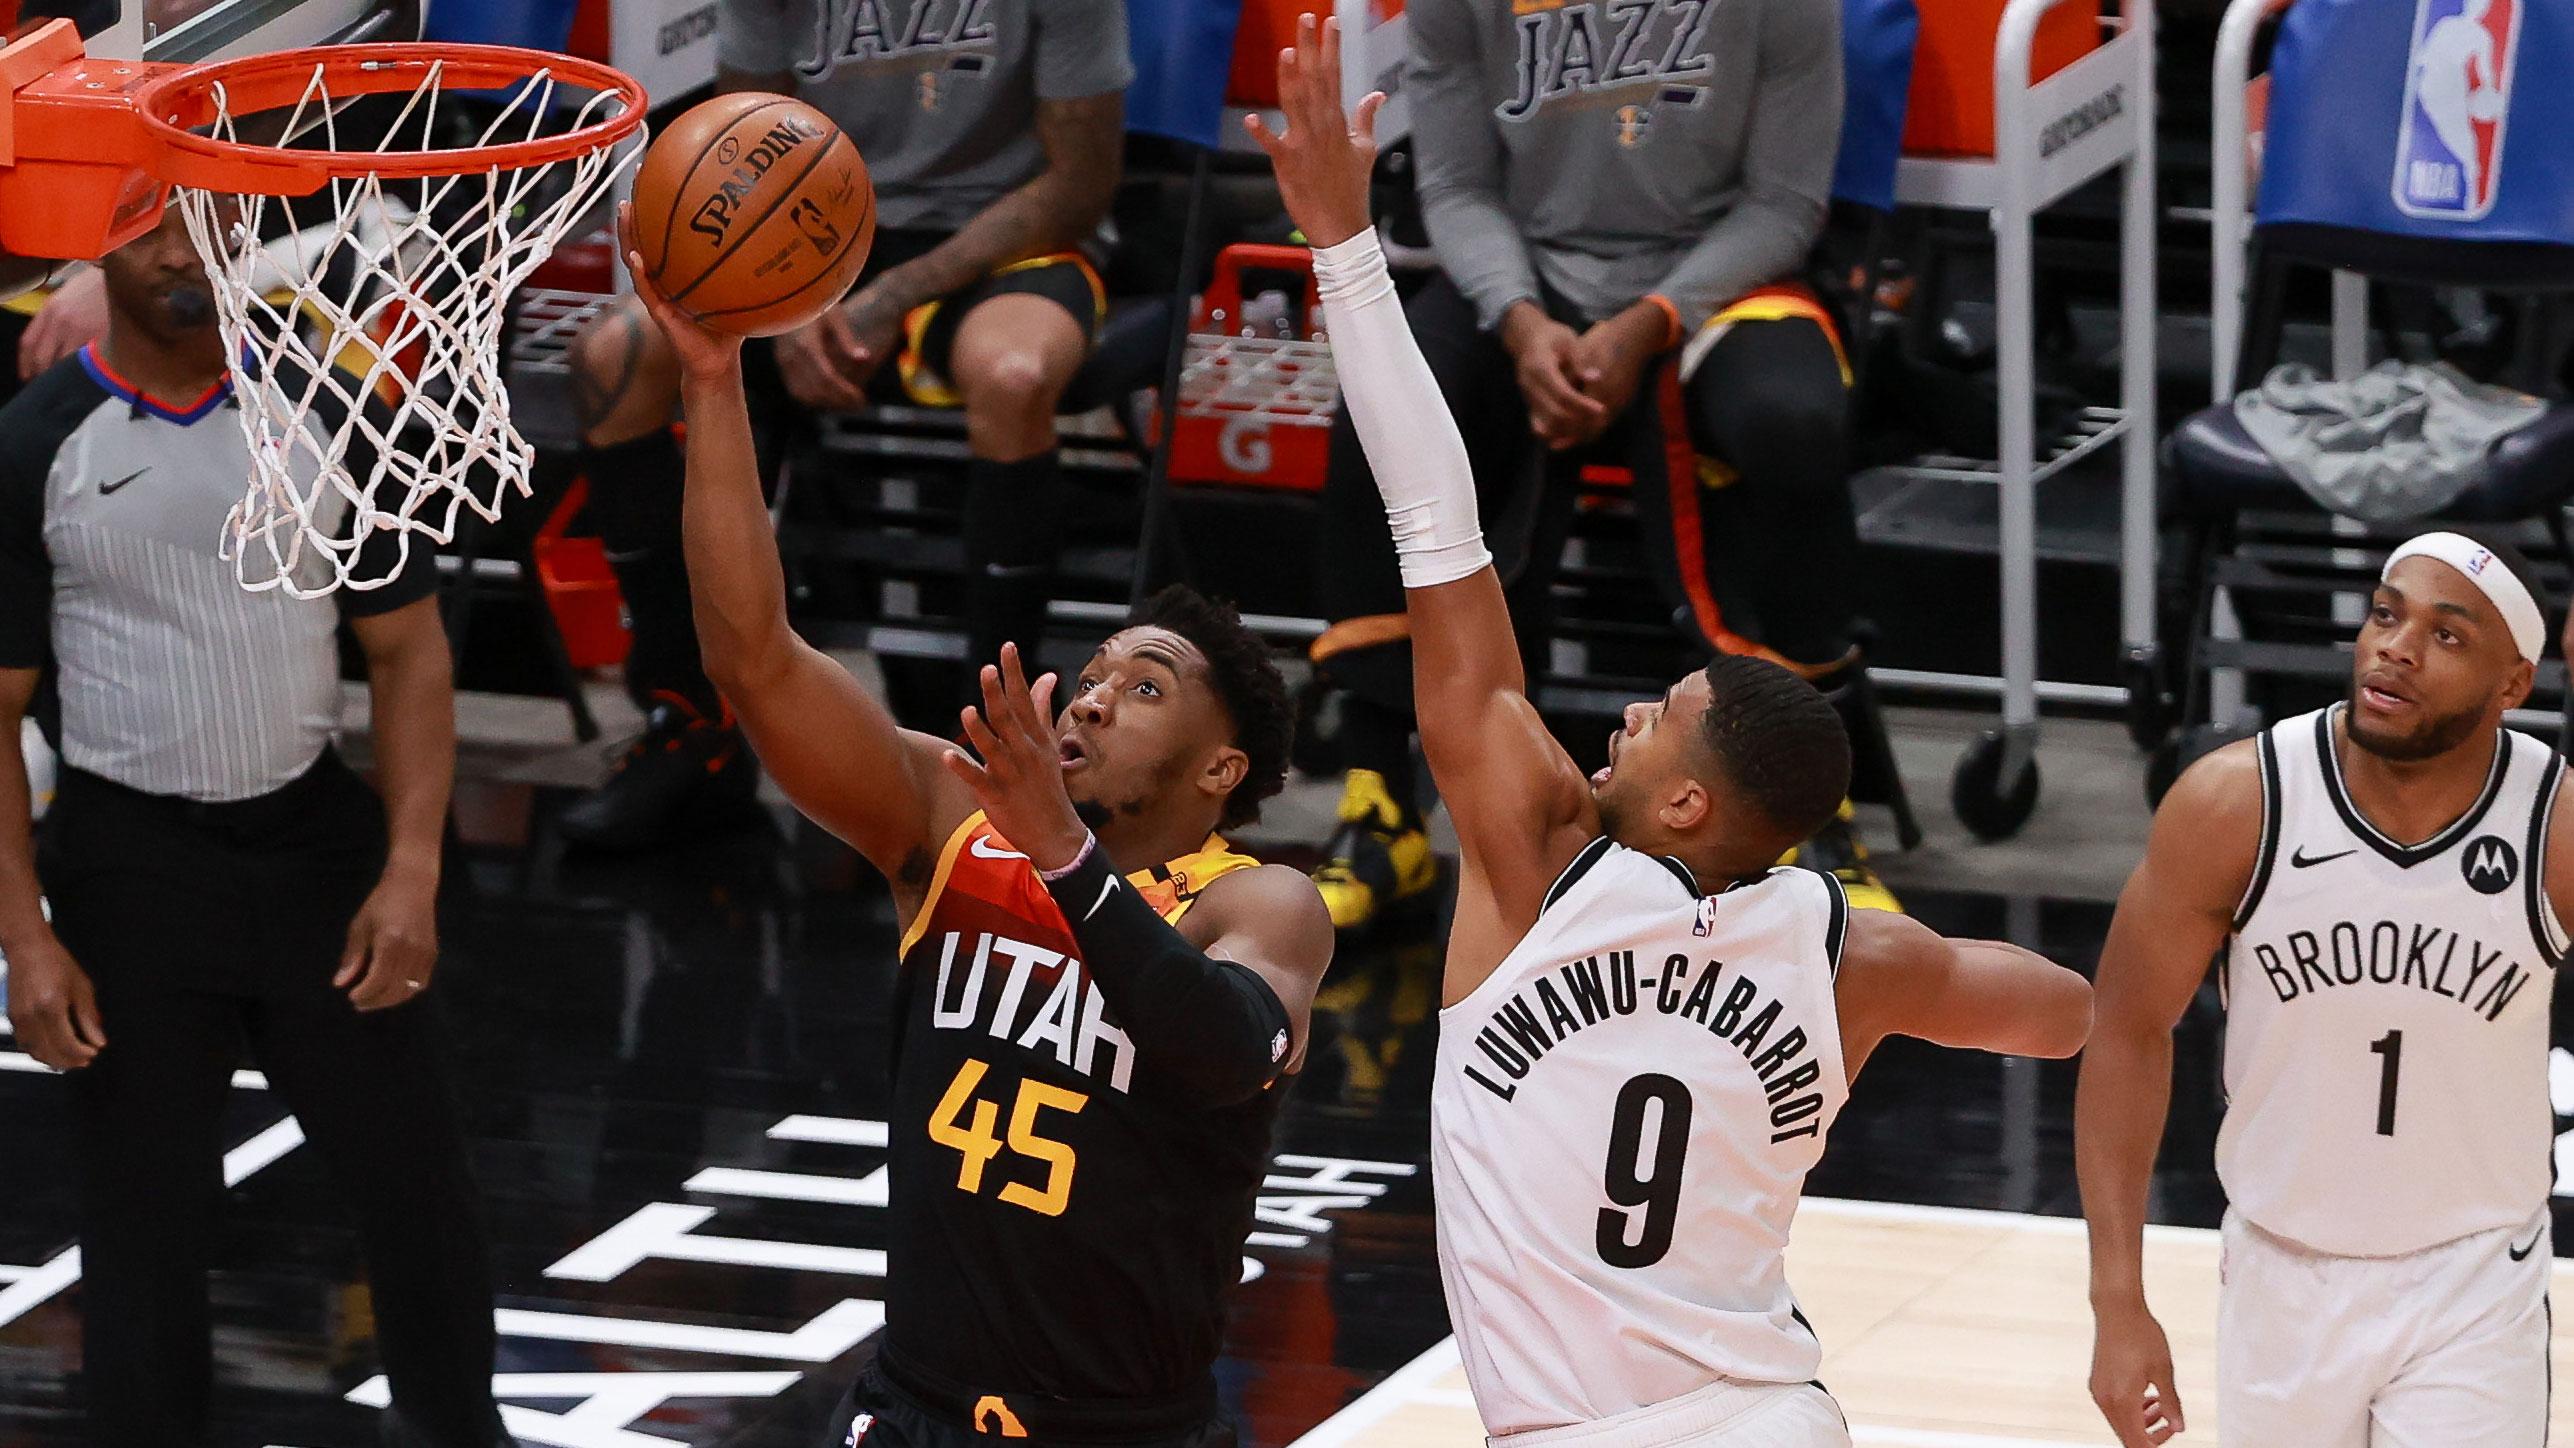 Mar 24, 2021; Salt Lake City, Utah, USA; Utah Jazz guard Donovan Mitchell (45) gets past Brooklyn Nets guard Timothe Luwawu-Cabarrot (9) and to the basket during the first quarter at Vivint Smart Home Arena. / Chris Nicoll-USA TODAY Sports